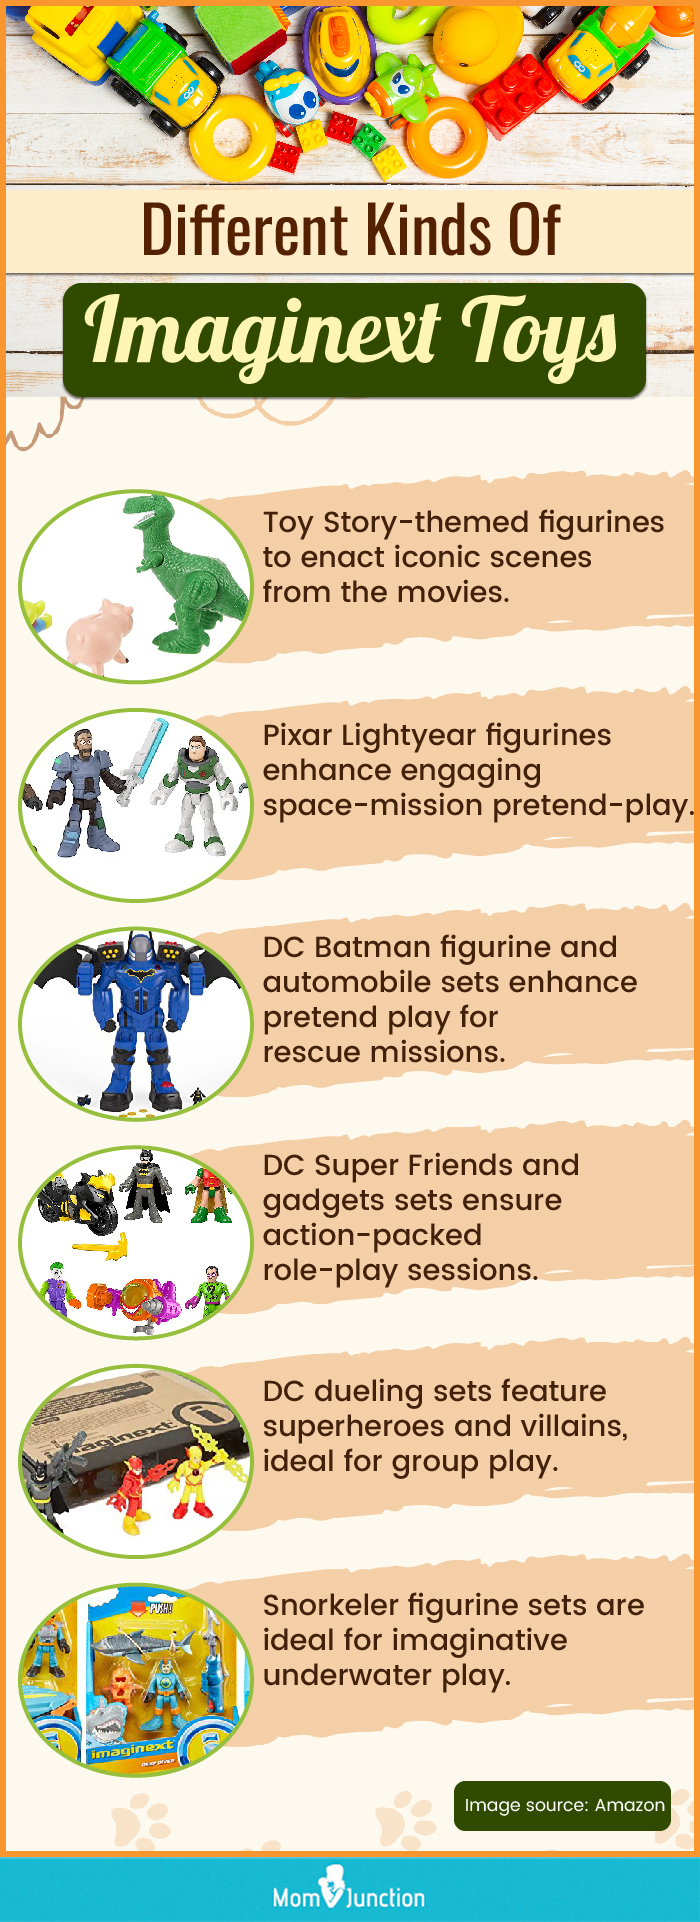 Different Kinds Of Imaginext Toys (infographic)